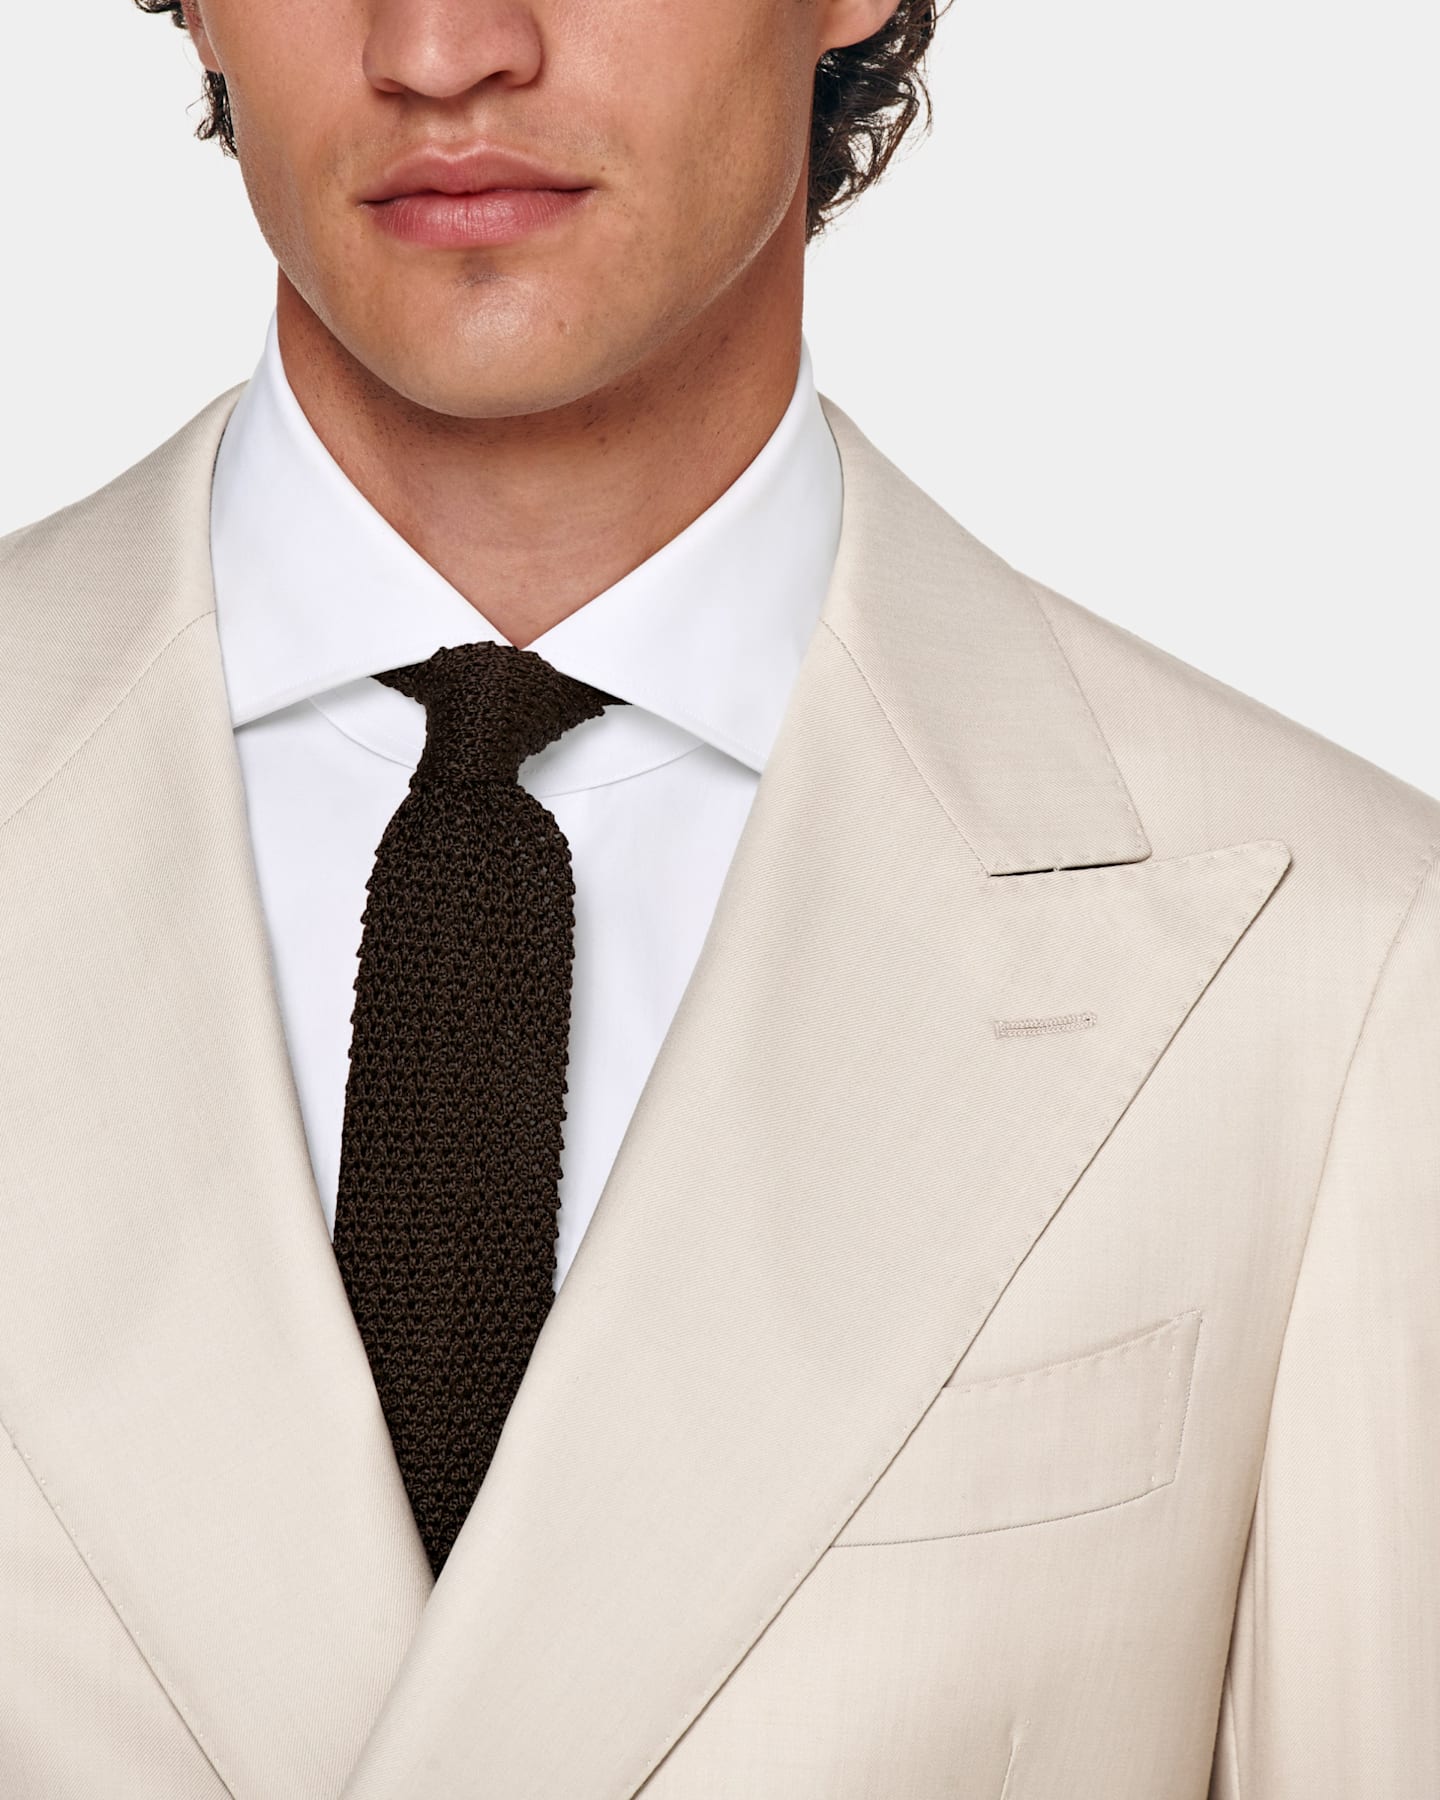 Light brown double-breasted suit and knitted tie.